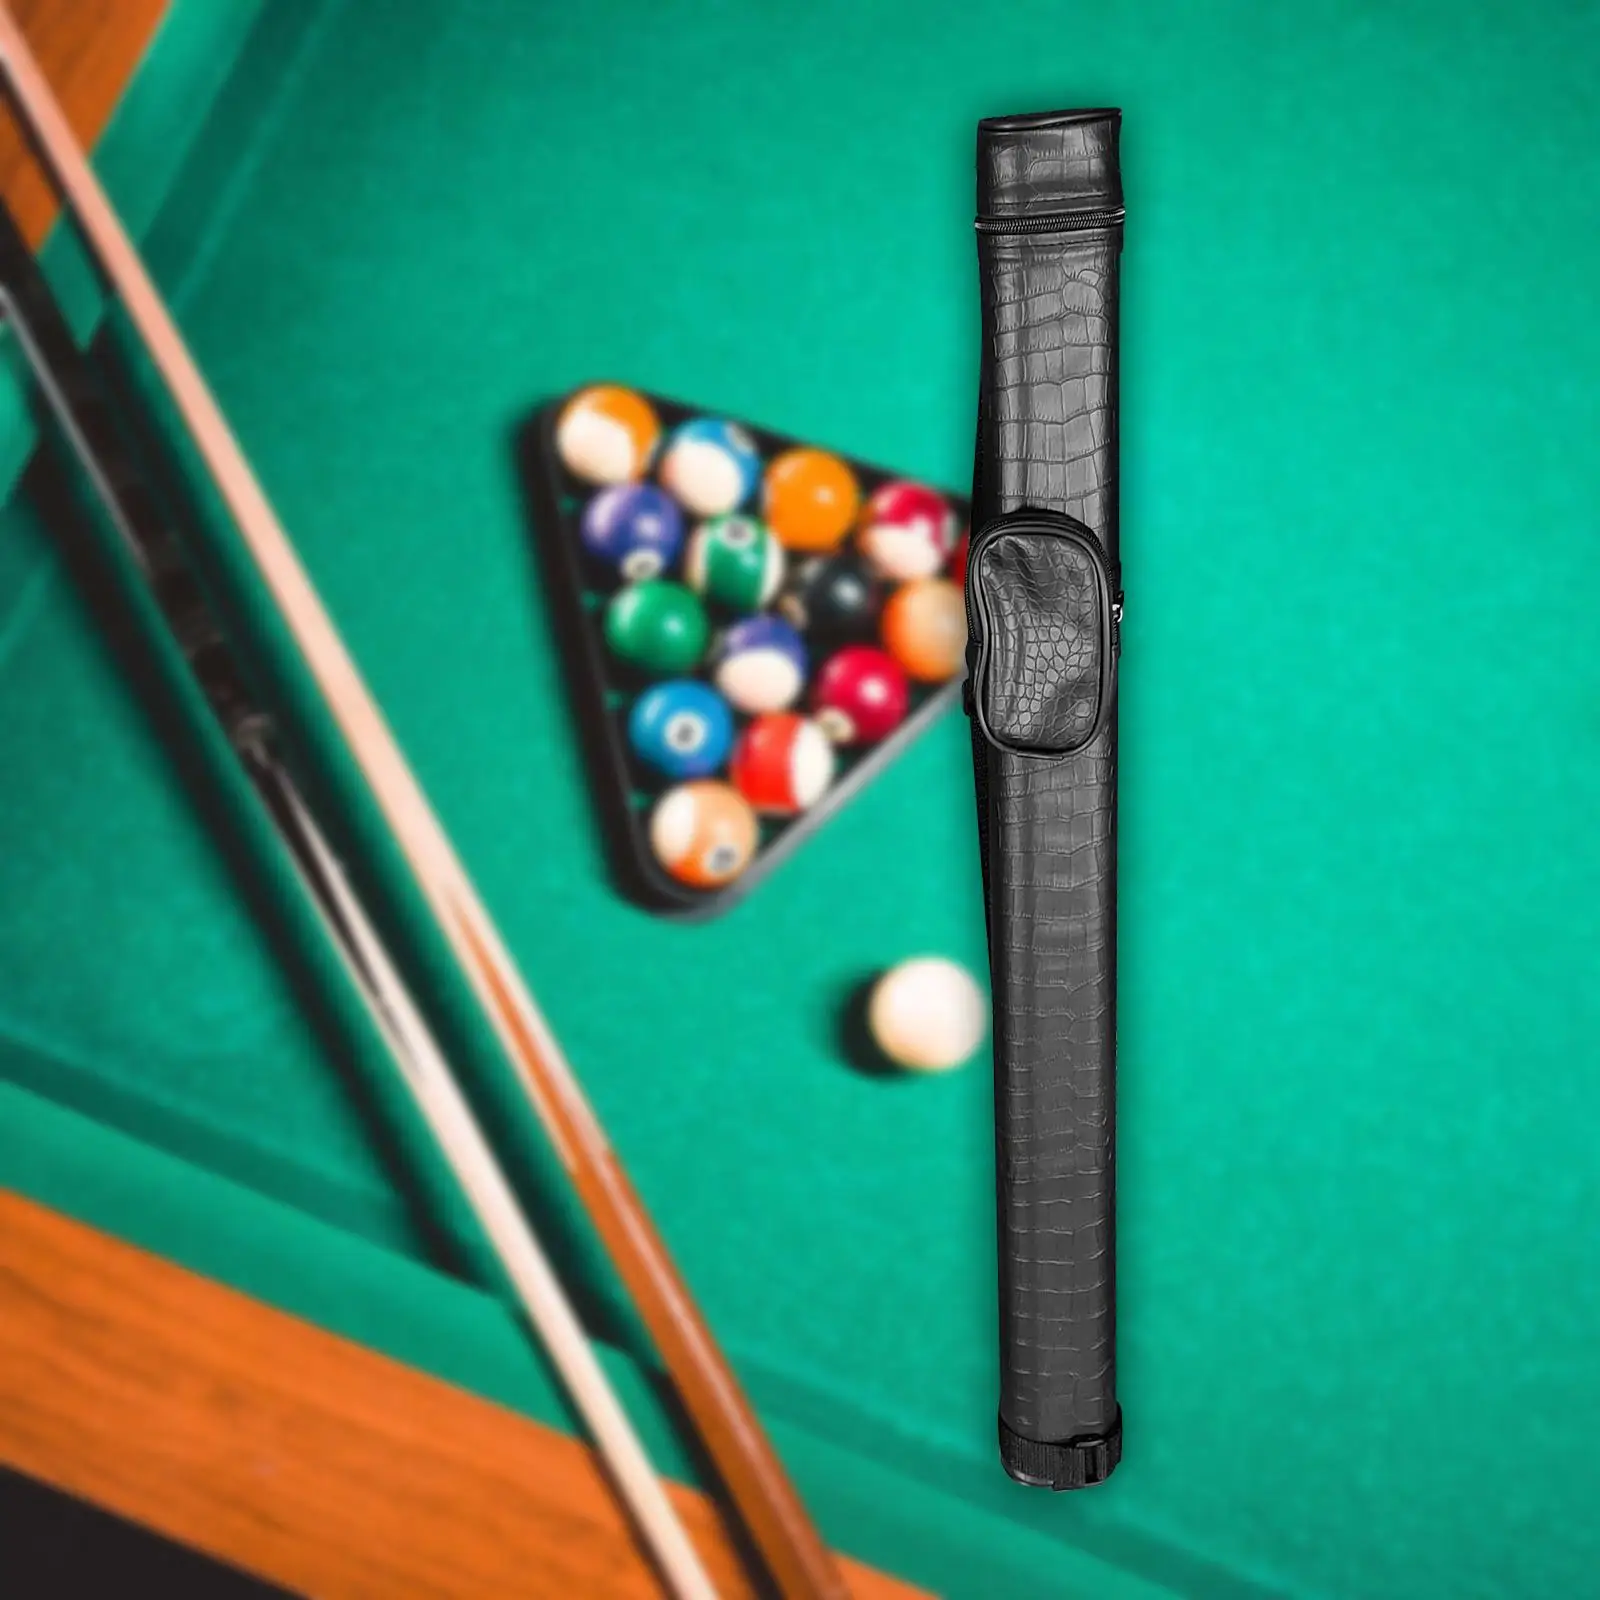 Pool Carrying Case Retro Style Classic 2 Holes Waterproof 1/2 Billiard for Games Sports Billiard Room Black